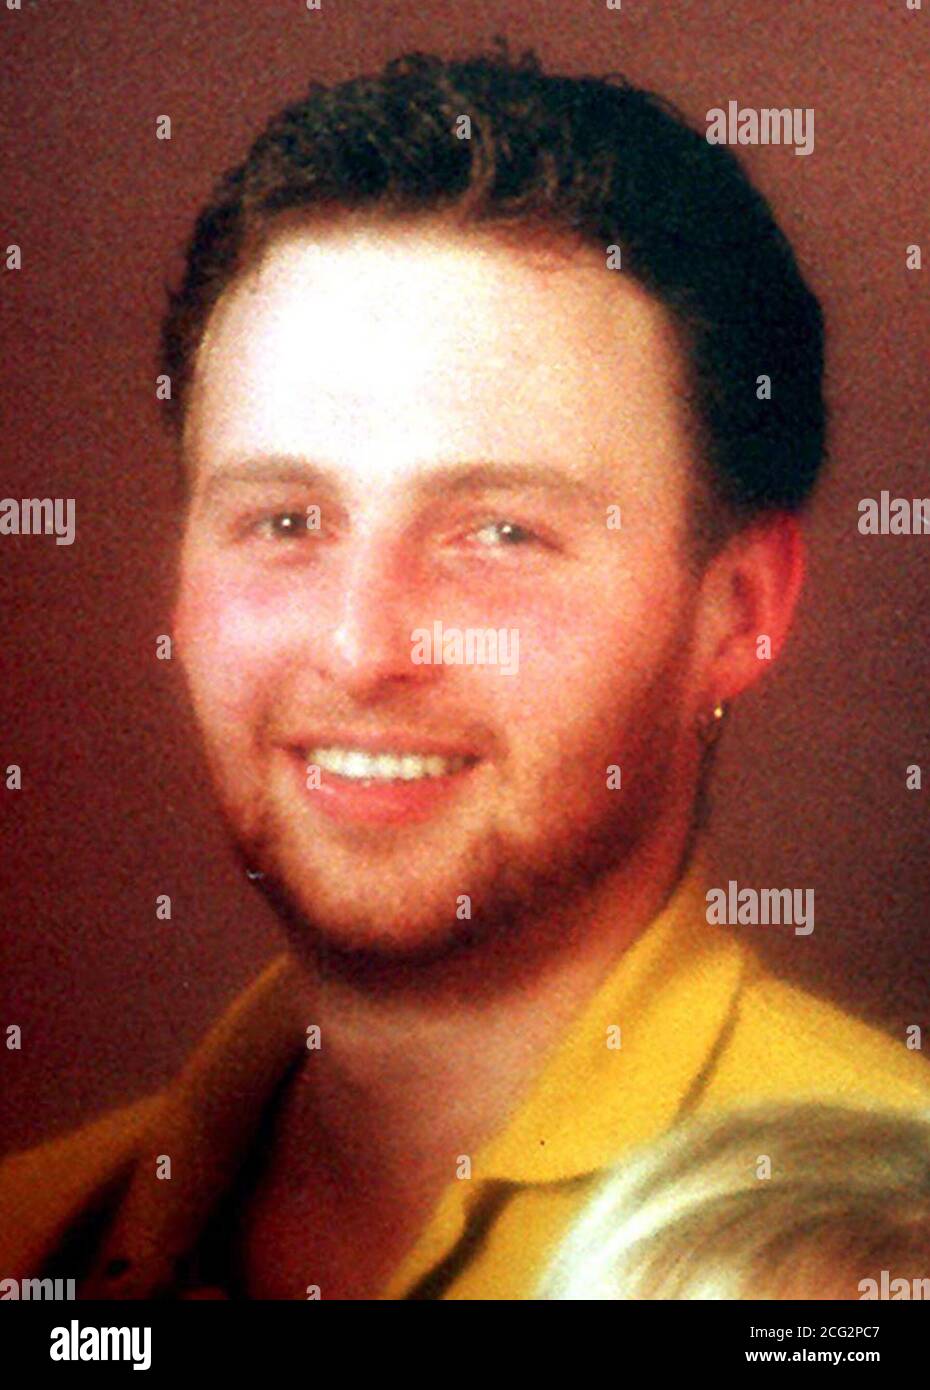 pap man1. WARRINGTON. 25/11/94. Collect pic of Michael Murray, who was blasted to death with a  shotgun along with his friend Raymond Maguire while sitting in a parked car in Warrington last night (Thur). The lone gunman is believed to have fired up to six shots at the pair before calmly walking away down a side street. See PA story CRIME Shot (Lead). PA NEWS/JD. Stock Photo